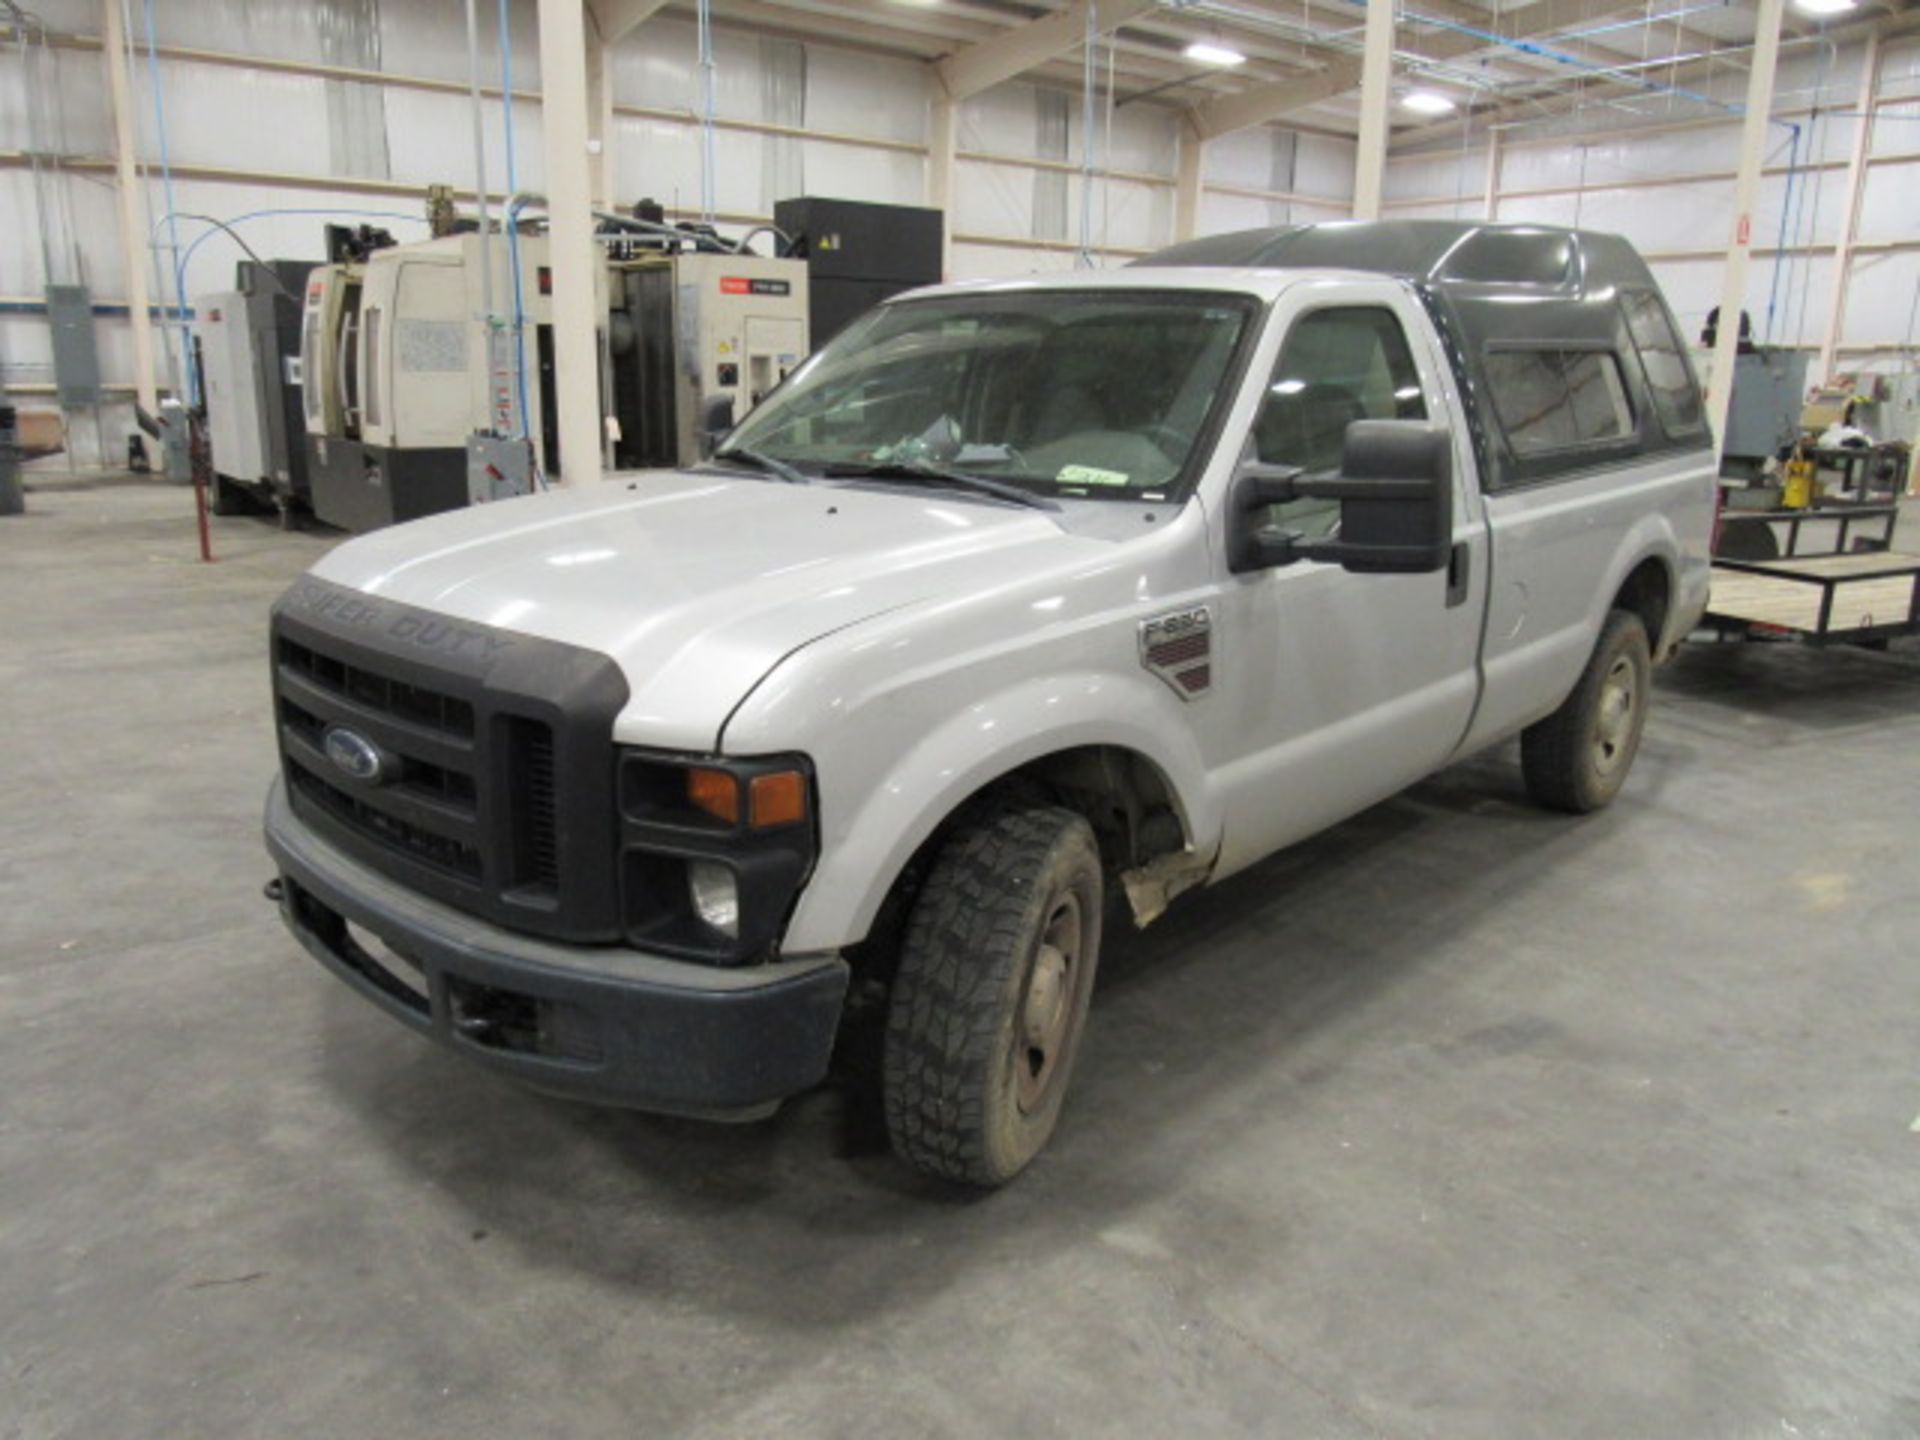 Ford F-250 Automatic Pick-Up Truck with 8' Bed, Air, Bed Shell, Approx 228,000 Miles, mfg.2008 - Image 7 of 8